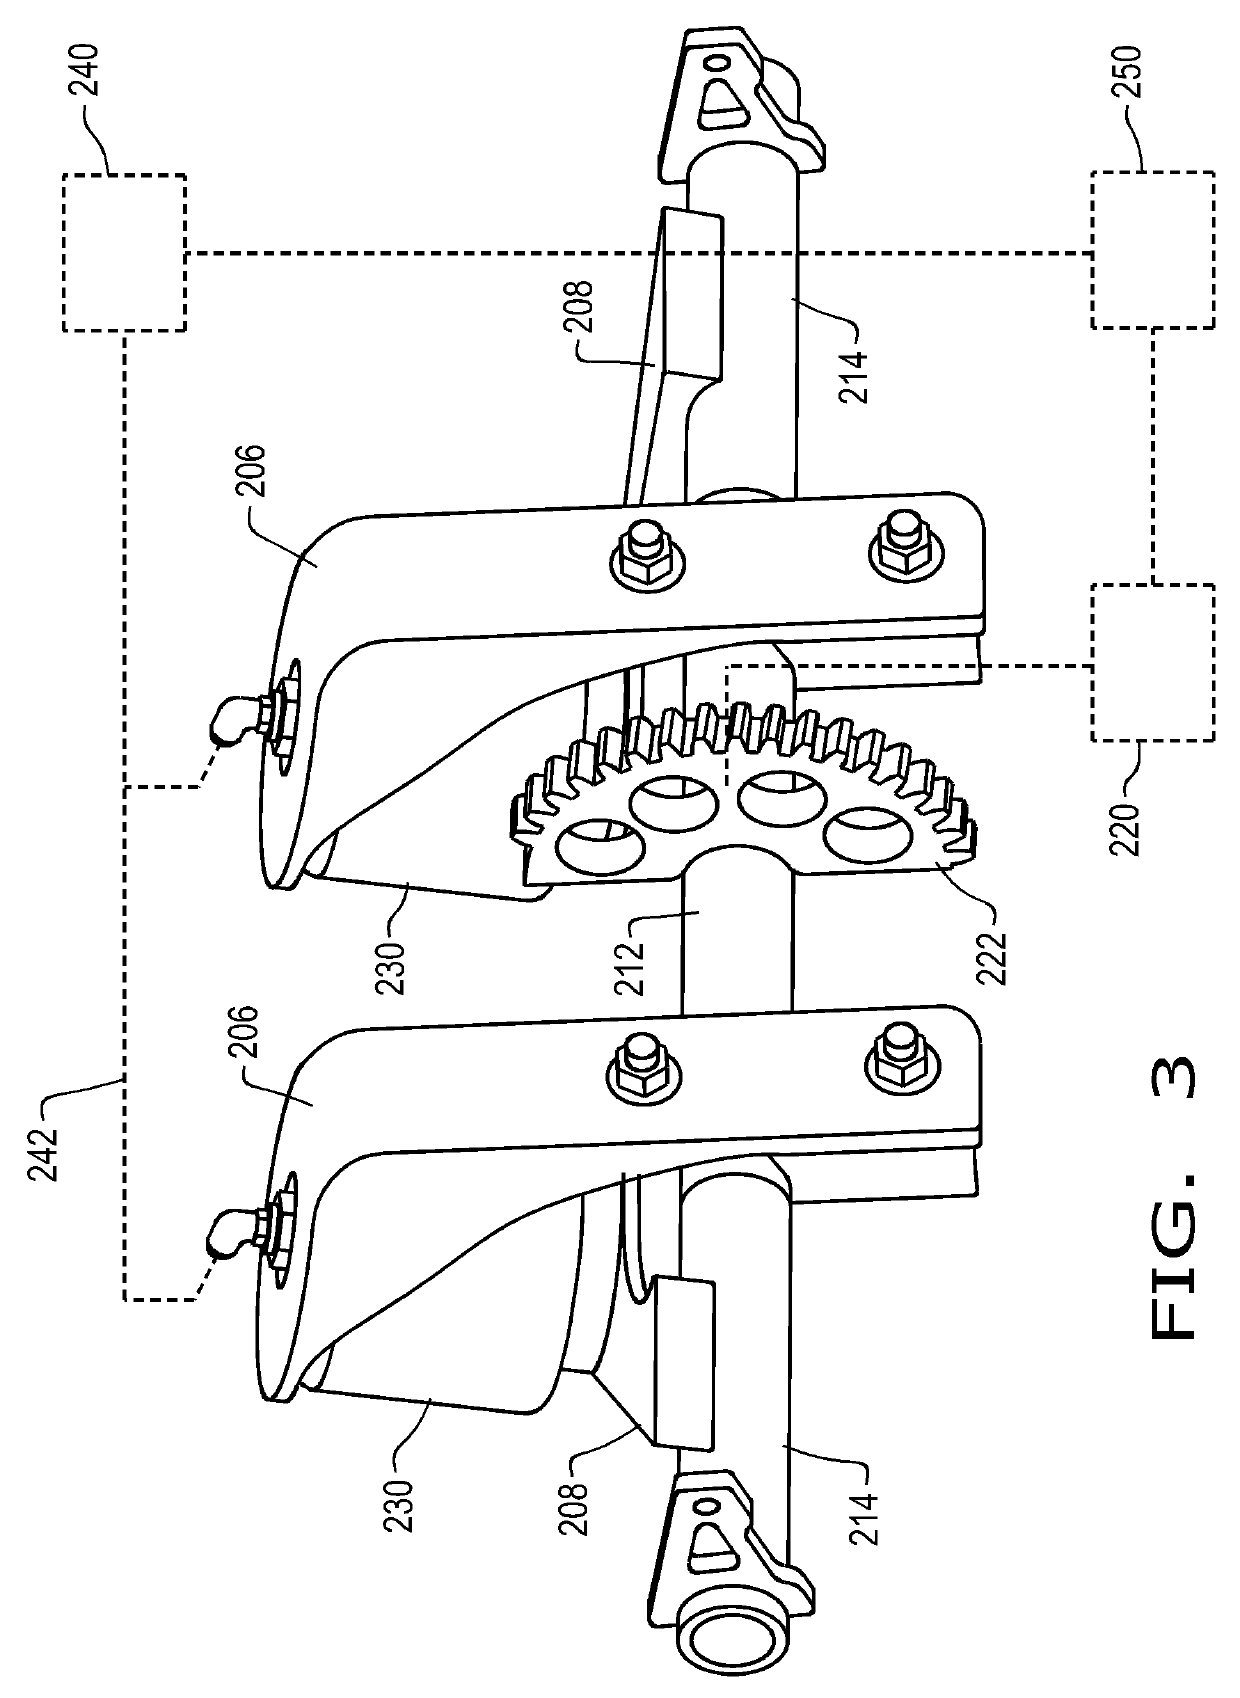 Adjustment and suspension device for concaves